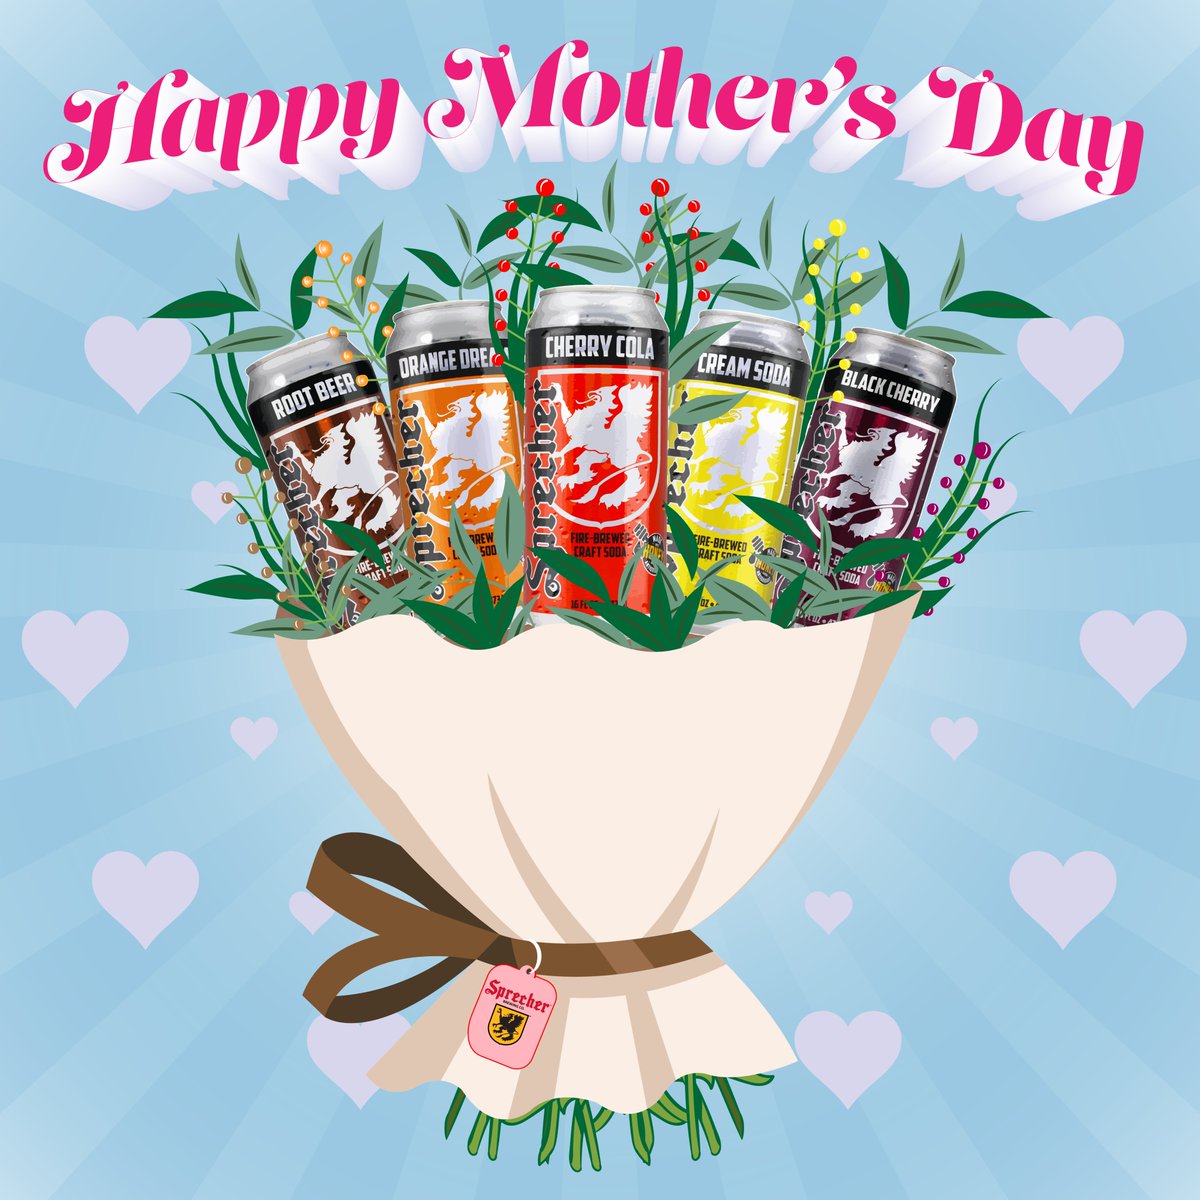 💐 Cheers to all the moms out there who make life sweet - Happy Mother's Day!